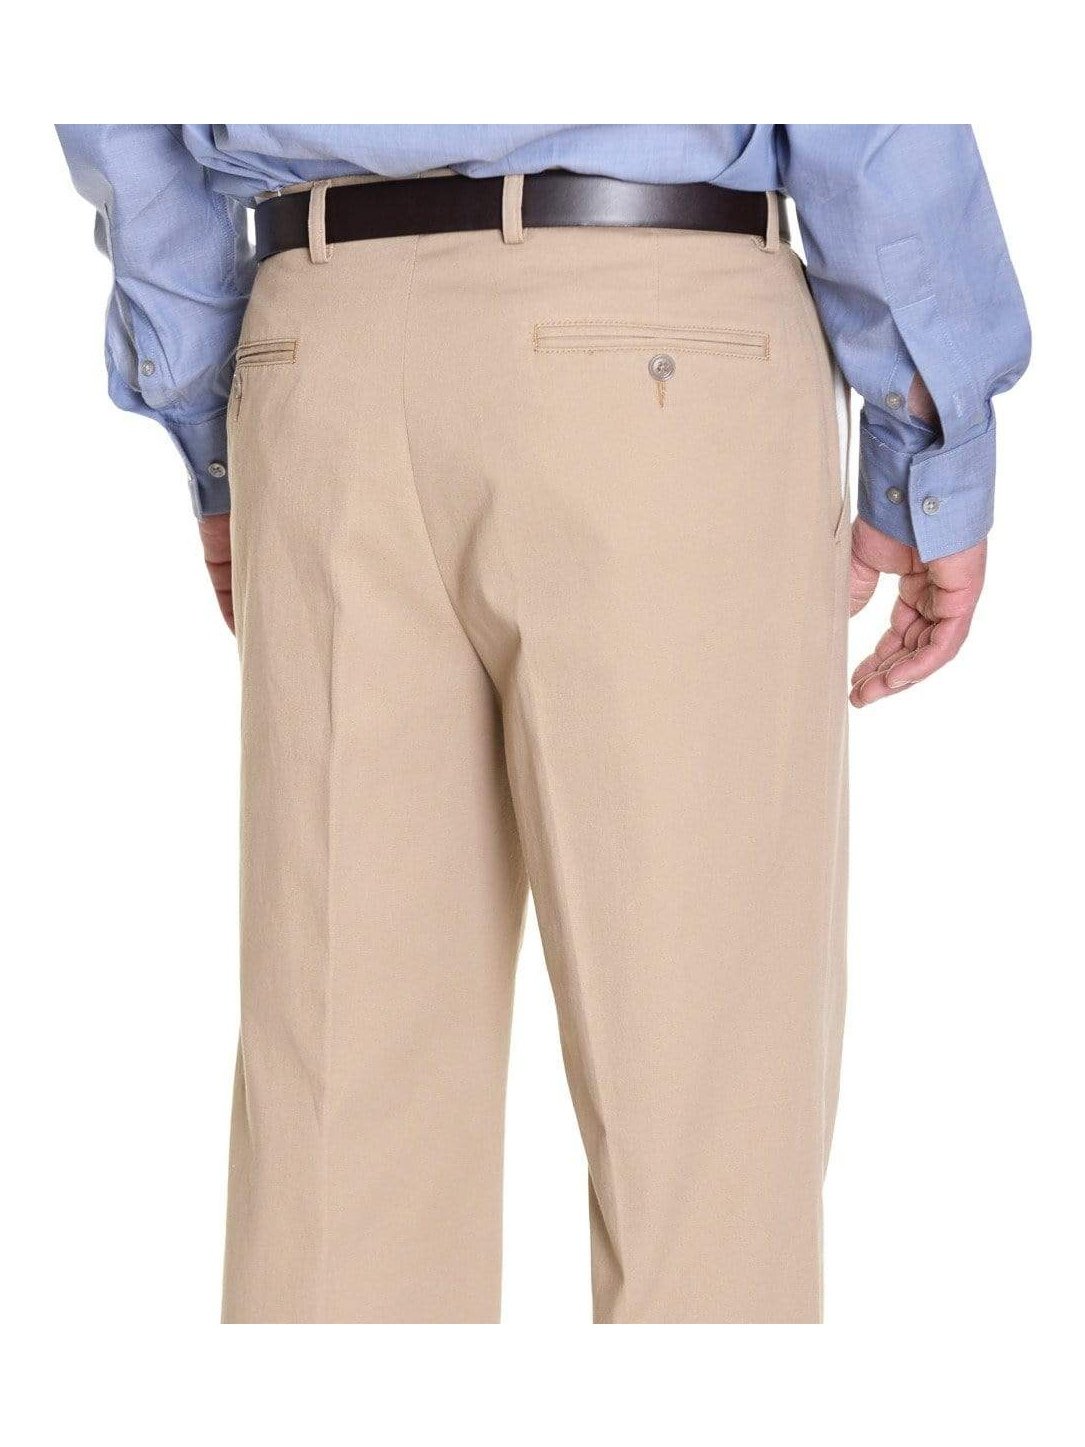 Milwaukee Men's 34 in. x 32 in. Khaki and Gray Cotton/Polyester/Spandex  Flex Work Pants with 6-Pockets (2-Pack) 701K-3432-701G-3432 - The Home Depot